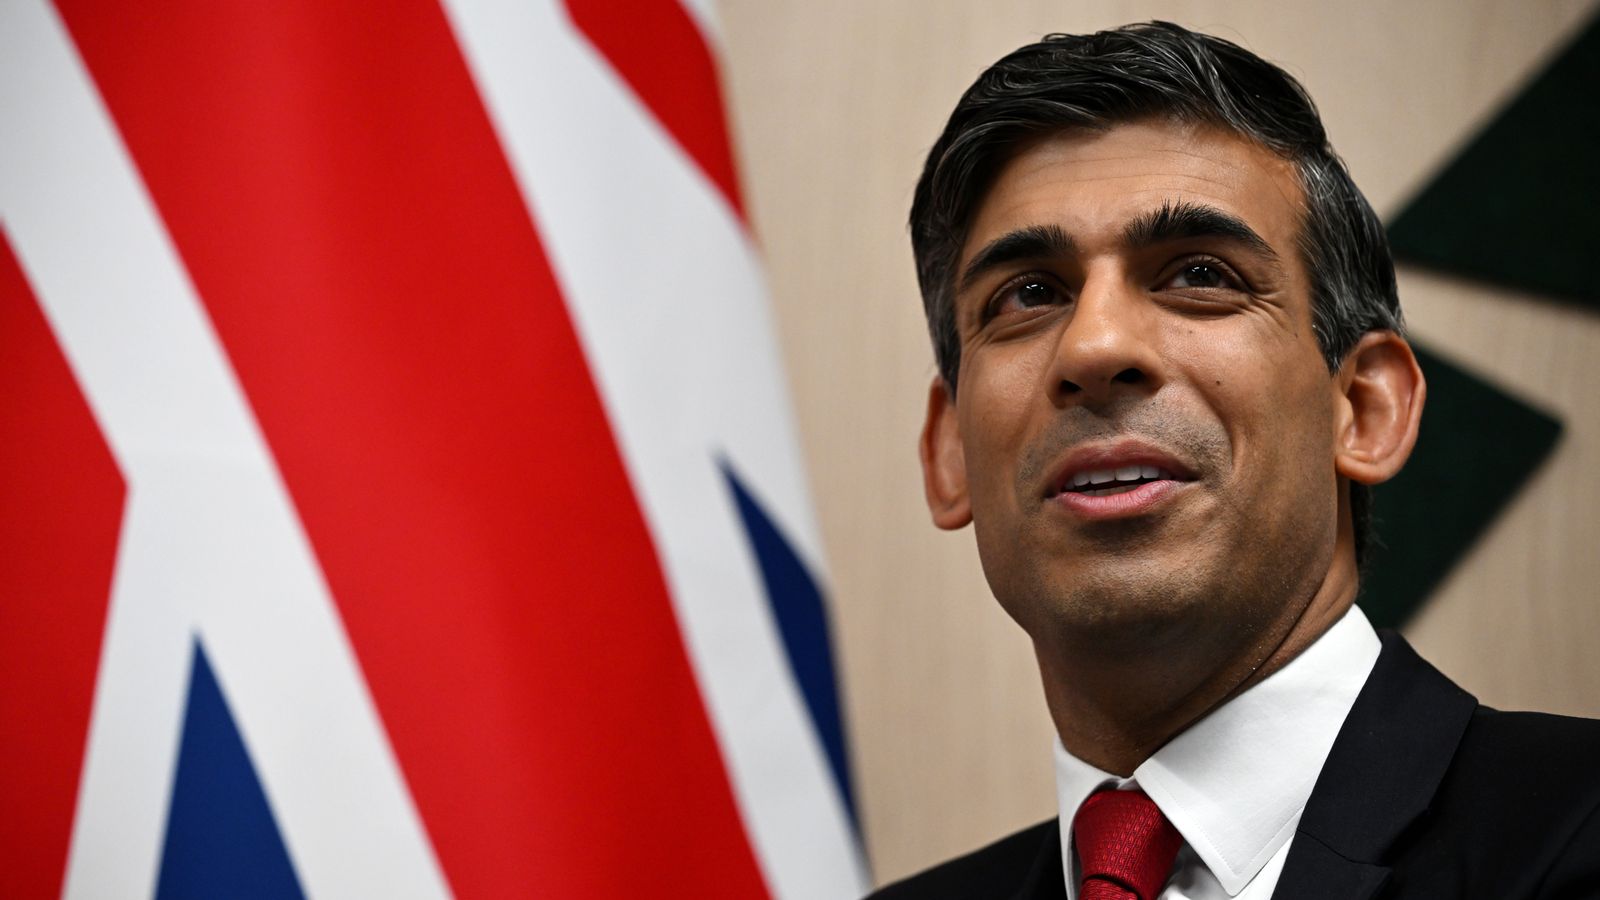 Rishi Sunak's approval ratings fall to lowest level since becoming prime minister